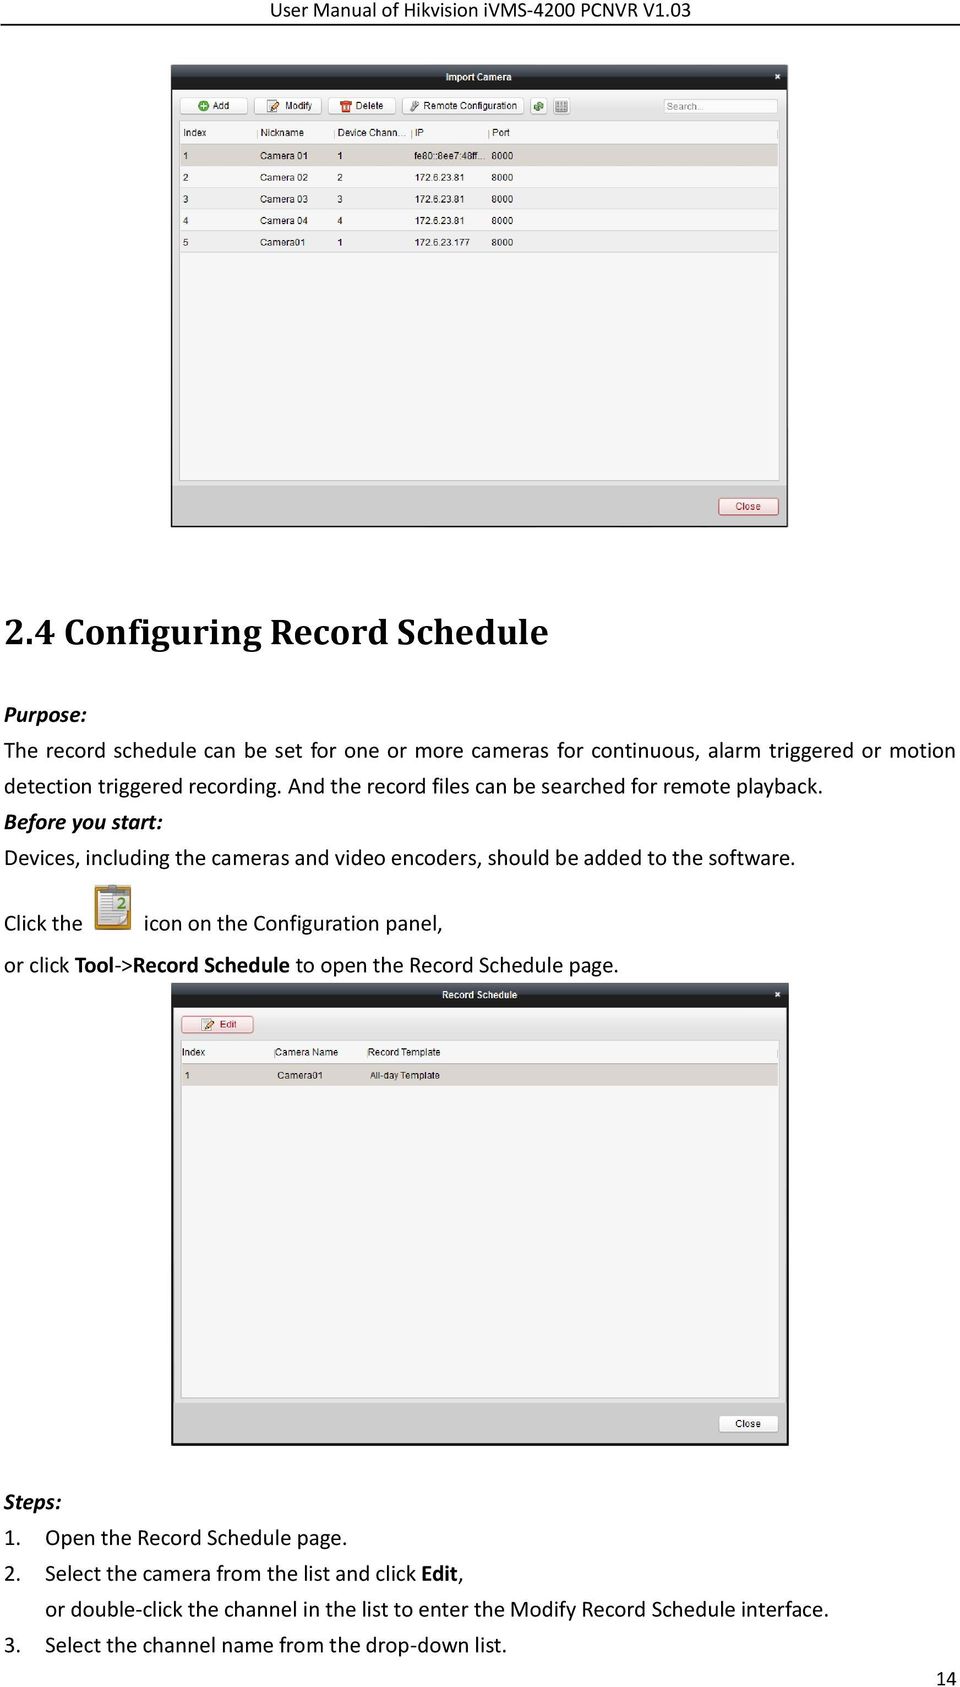 Click the icon on the Configuration panel, or click Tool->Record Schedule to open the Record Schedule page. 1. Open the Record Schedule page. 2.